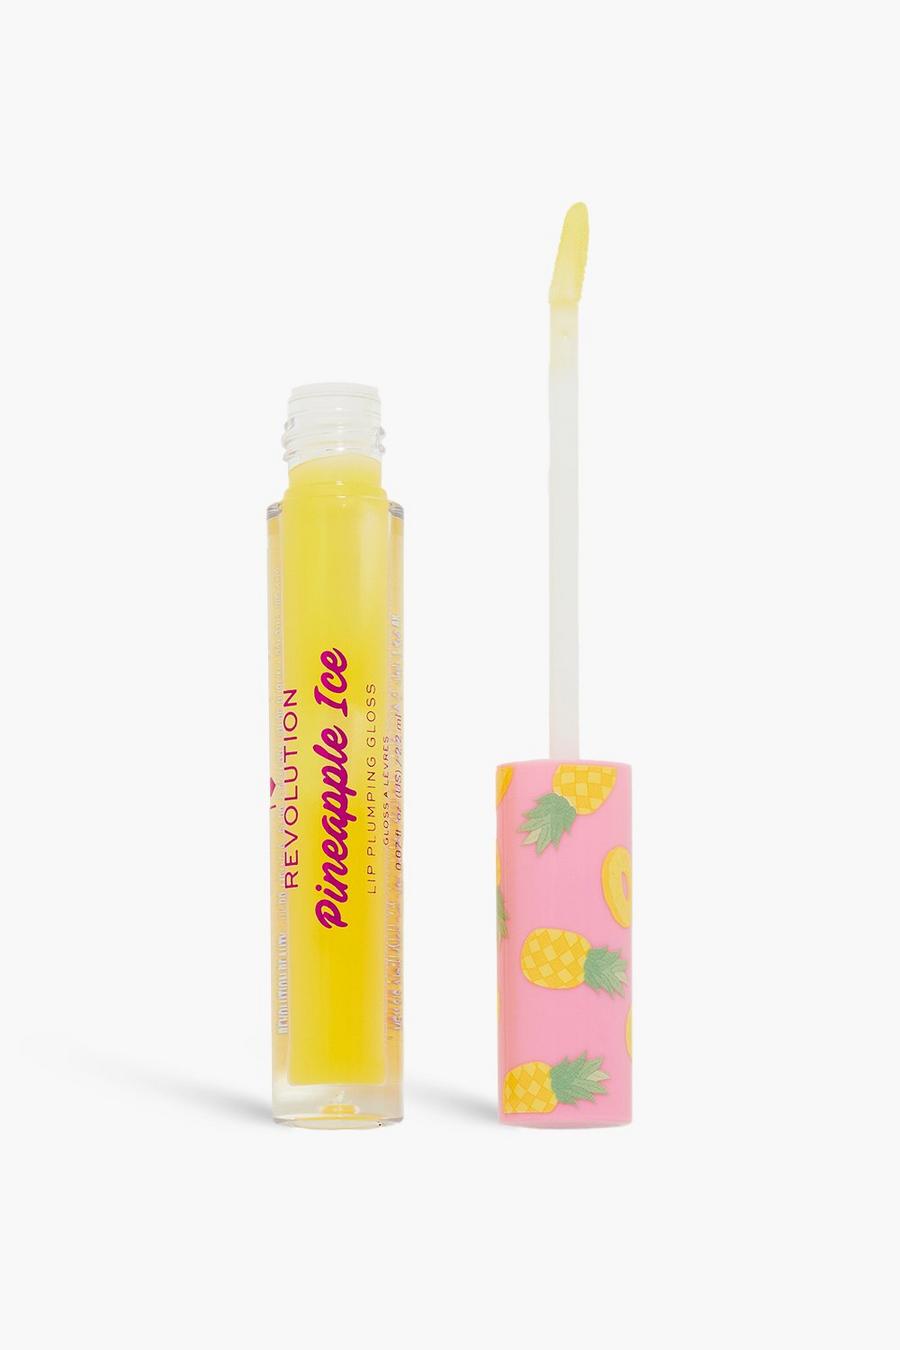 Clear transparent I Heart Revolution Tasty Pineapple Ice Plumping Gloss Läppglans - Freeze image number 1